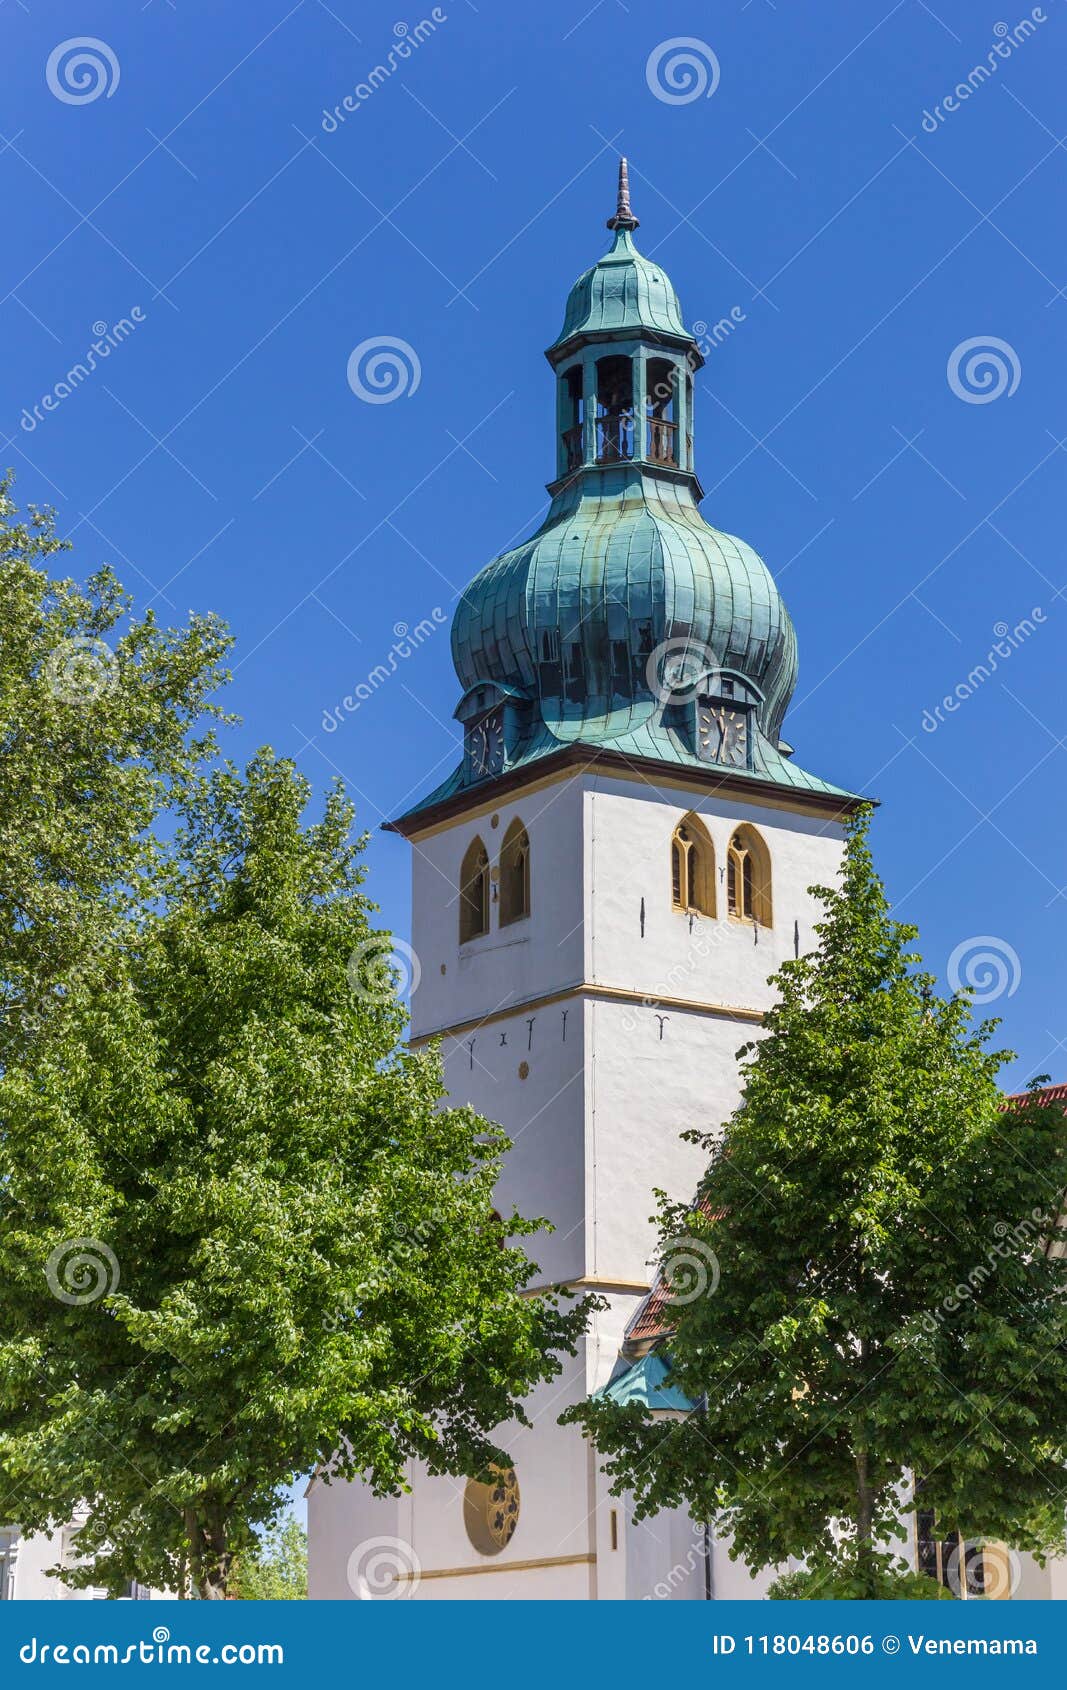 tower of the jacobi church in herford